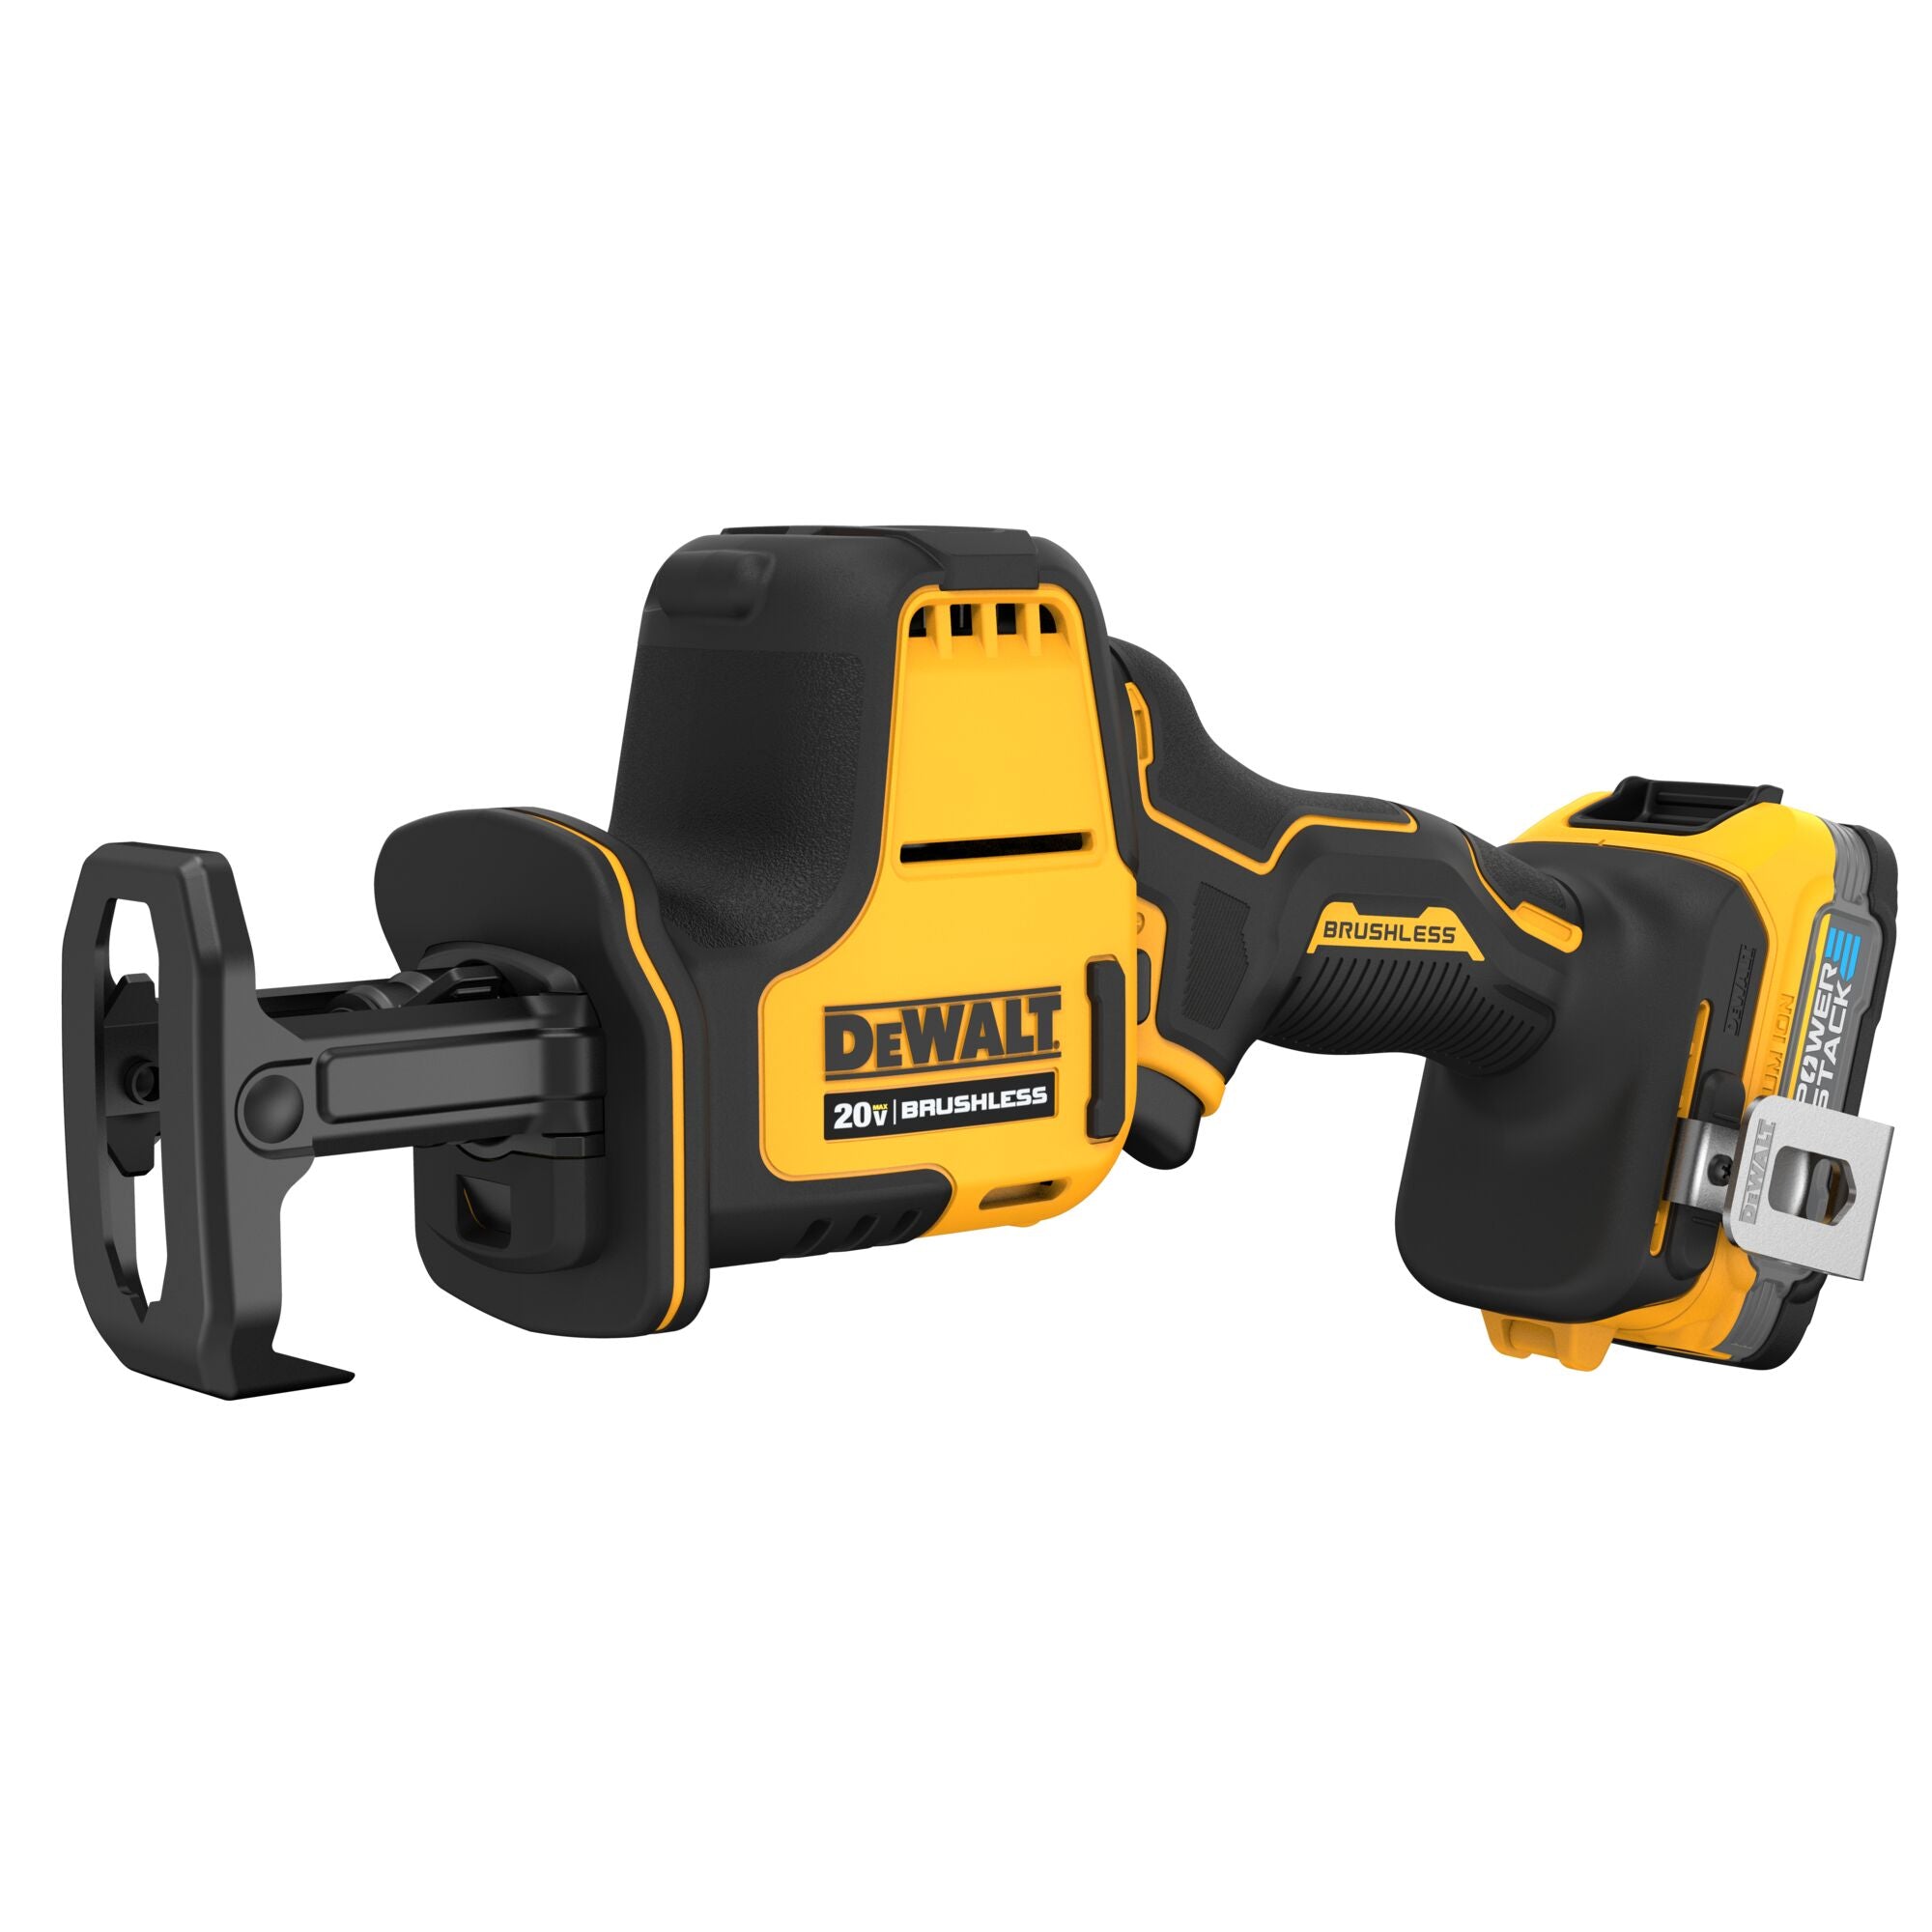 DeWALT DCS369B Reciprocating Saw Atomic 20 Volt Tool with Powerstack Battery and Charger